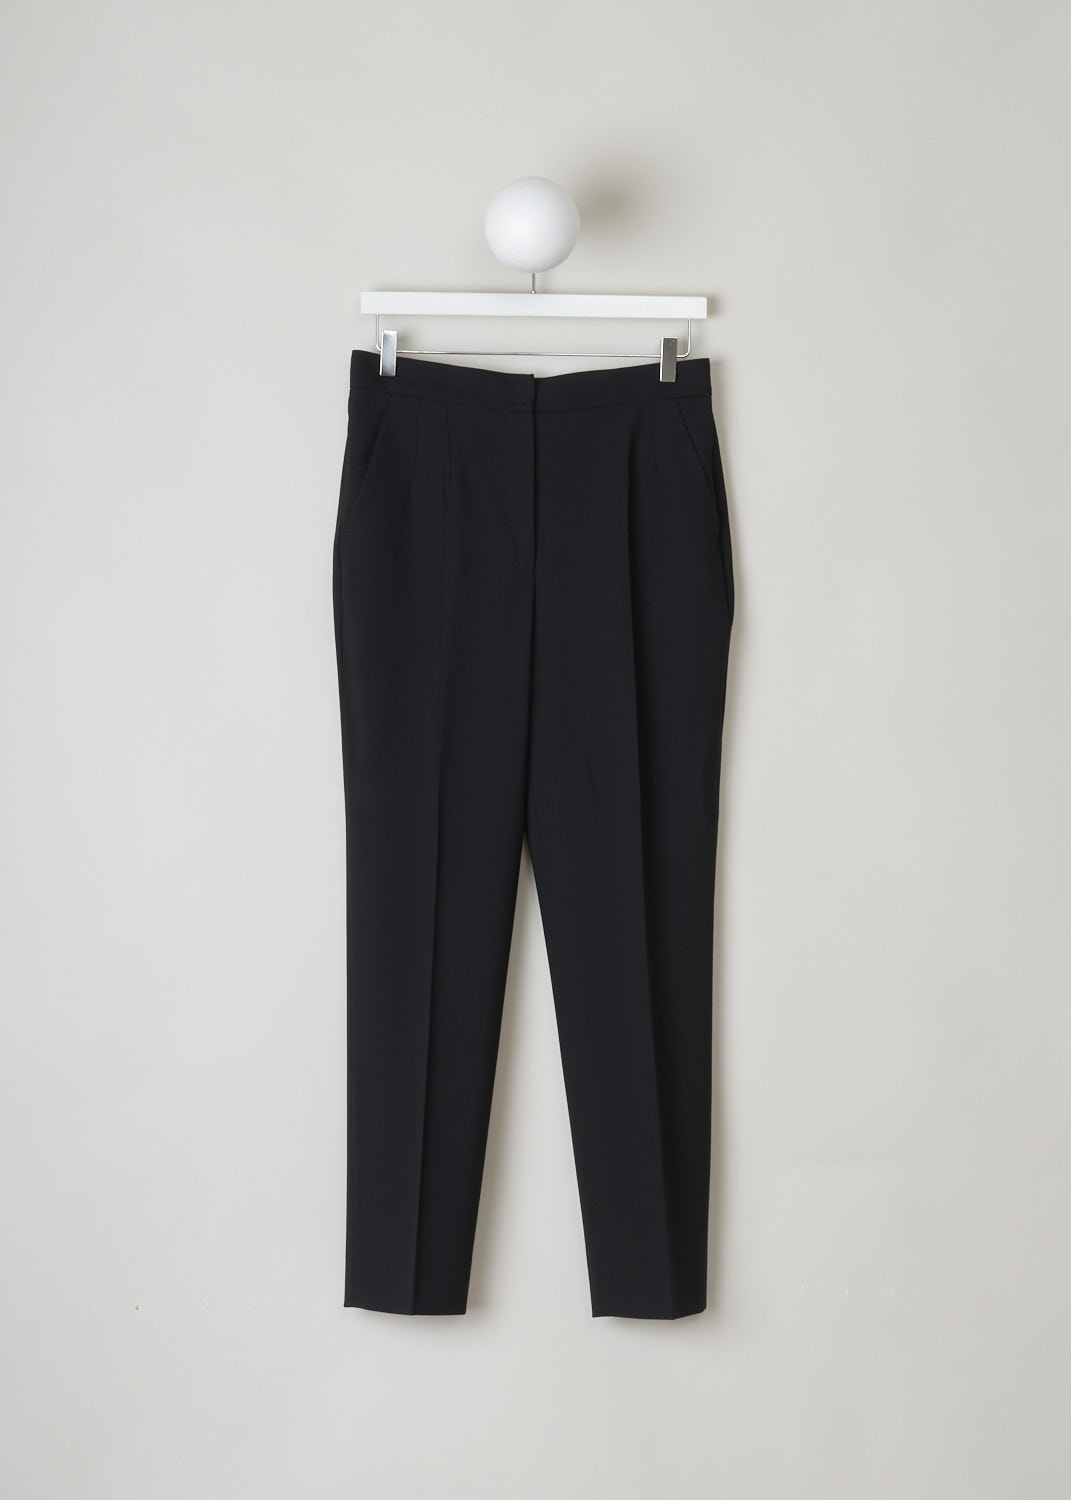 DOLCE & GABBANA, CLASSIC BLACK PANTS, FTAD4T_FUBCY_N0000, Black, Front, Beautiful black pants with subtle pleats around the waist area. These pants come with a concealed snap button and zipper closure. Slanted pockets can be found on either side. Along the length of the legs, front creases can be found. These same creases can also be found on the back. Two welt pockets can also be found on the back. 
